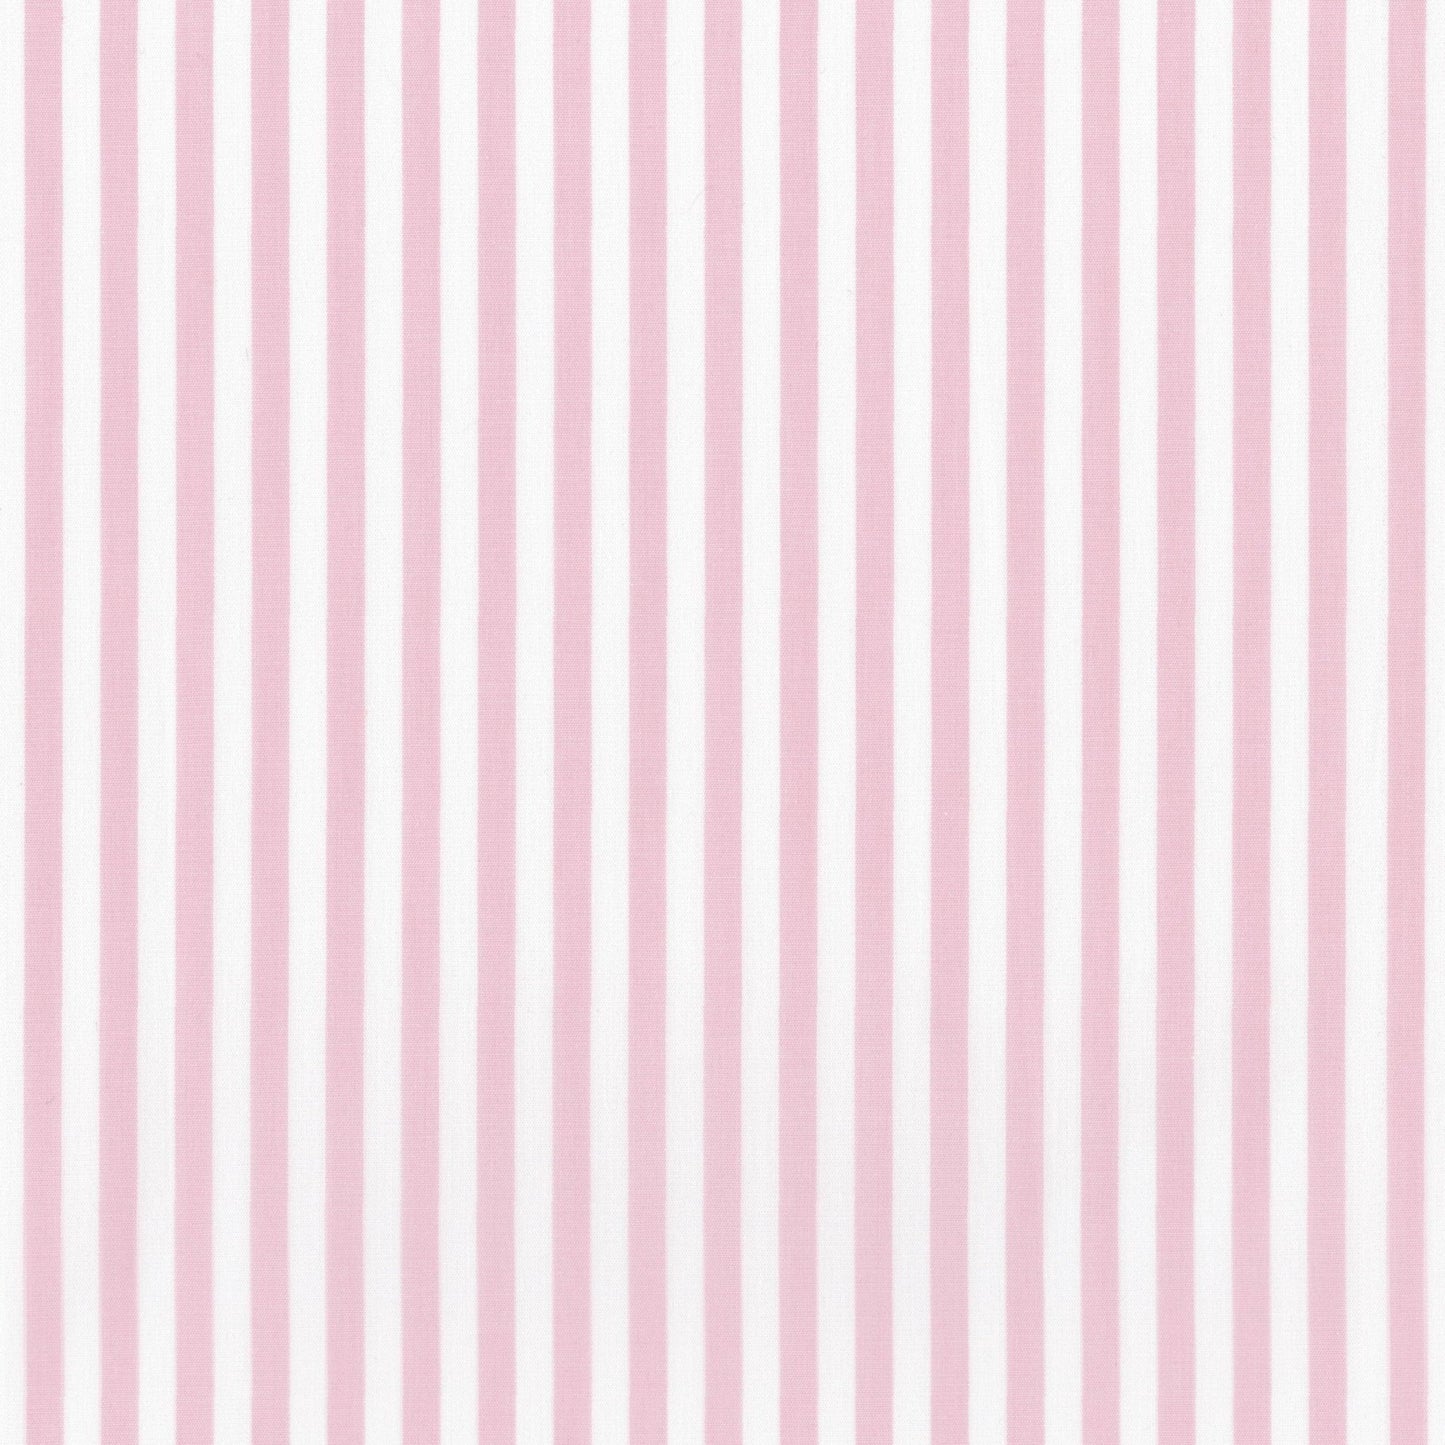 Baby Pink Stripe Swatch - New Arrivals Inc